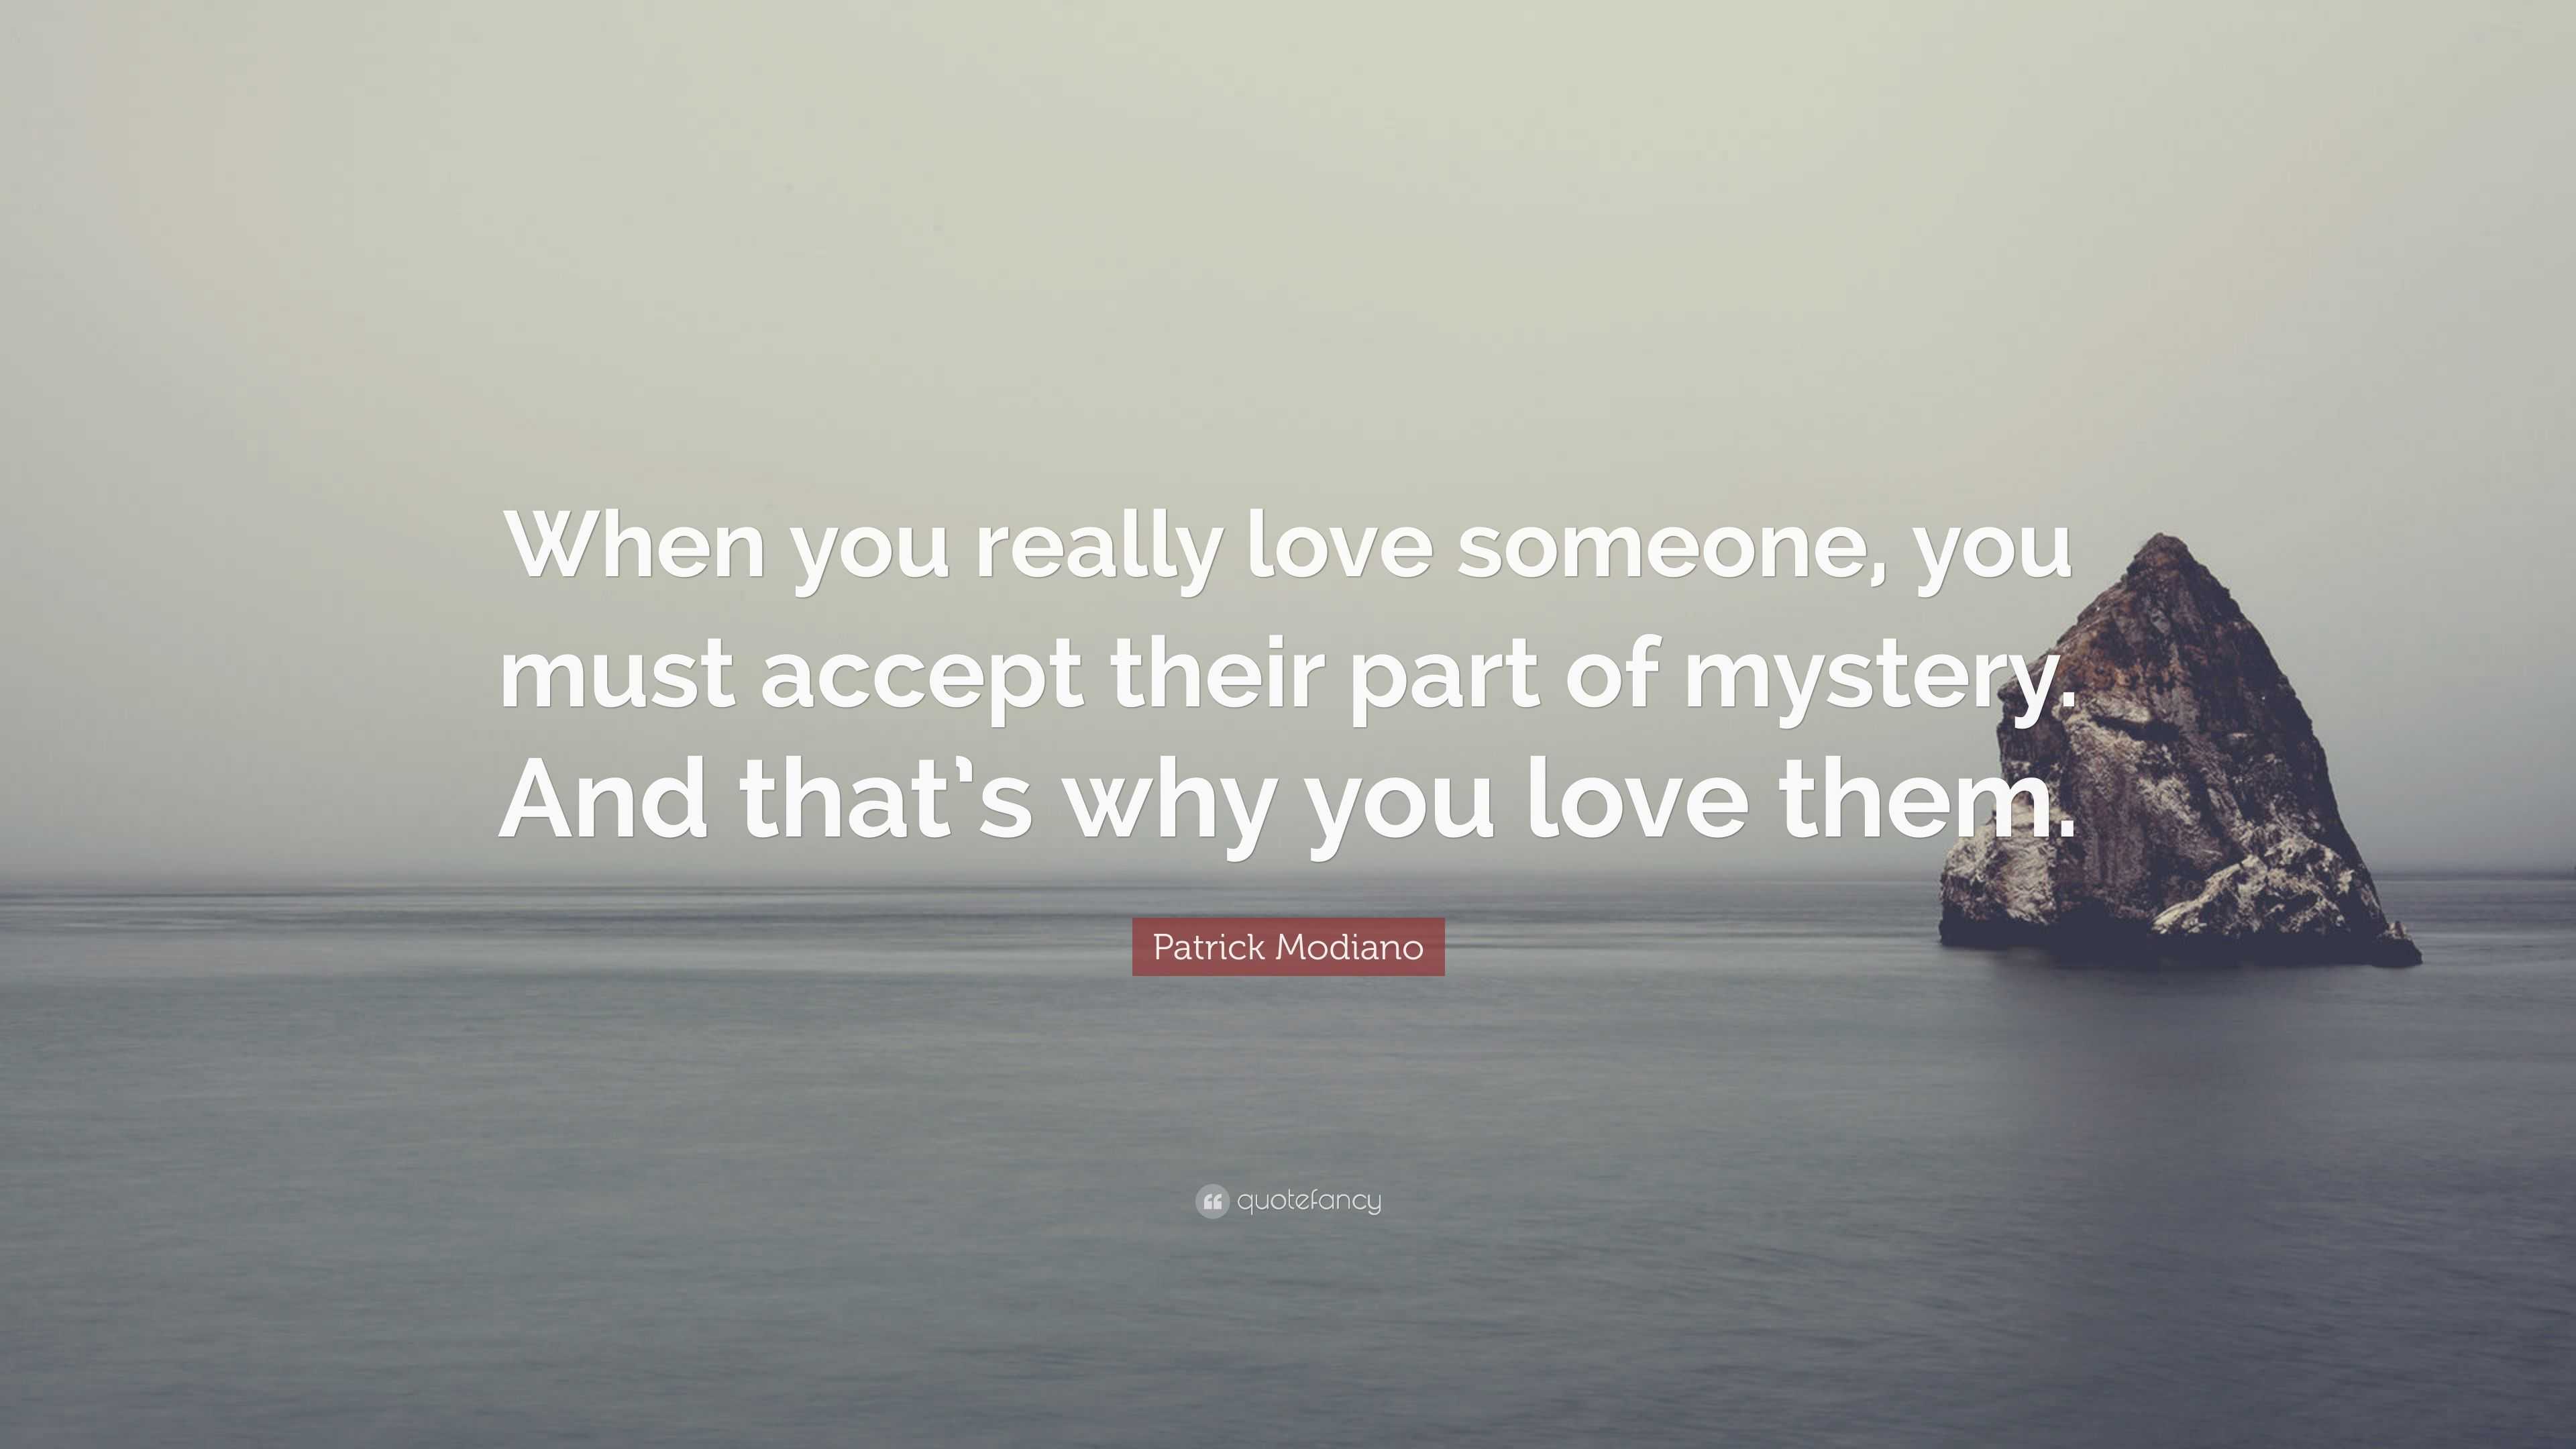 Patrick Modiano Quote: “When you really love someone, you must accept ...